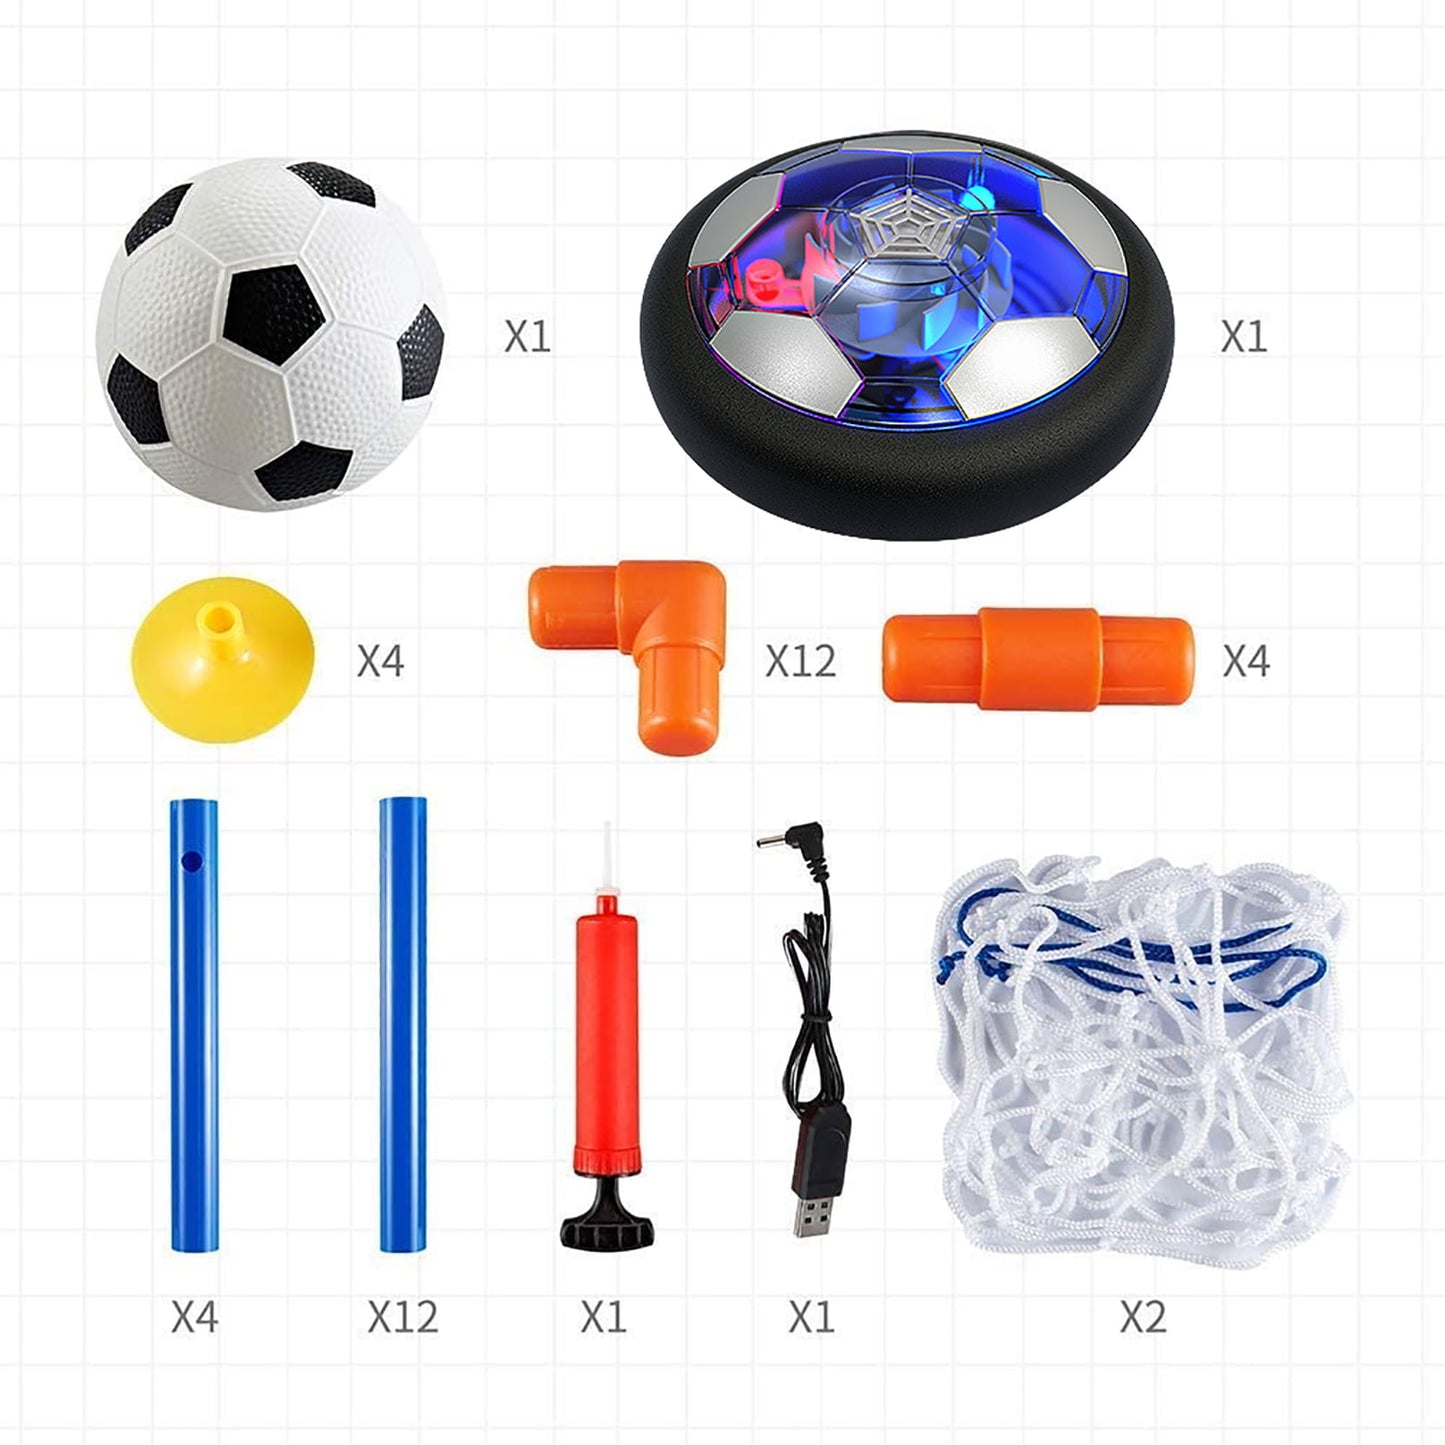 Hover Soccer Ball Set with 2 Goals, LED Rechargeable Indoor/Outdoor Games Toys for Kids Boy Girls